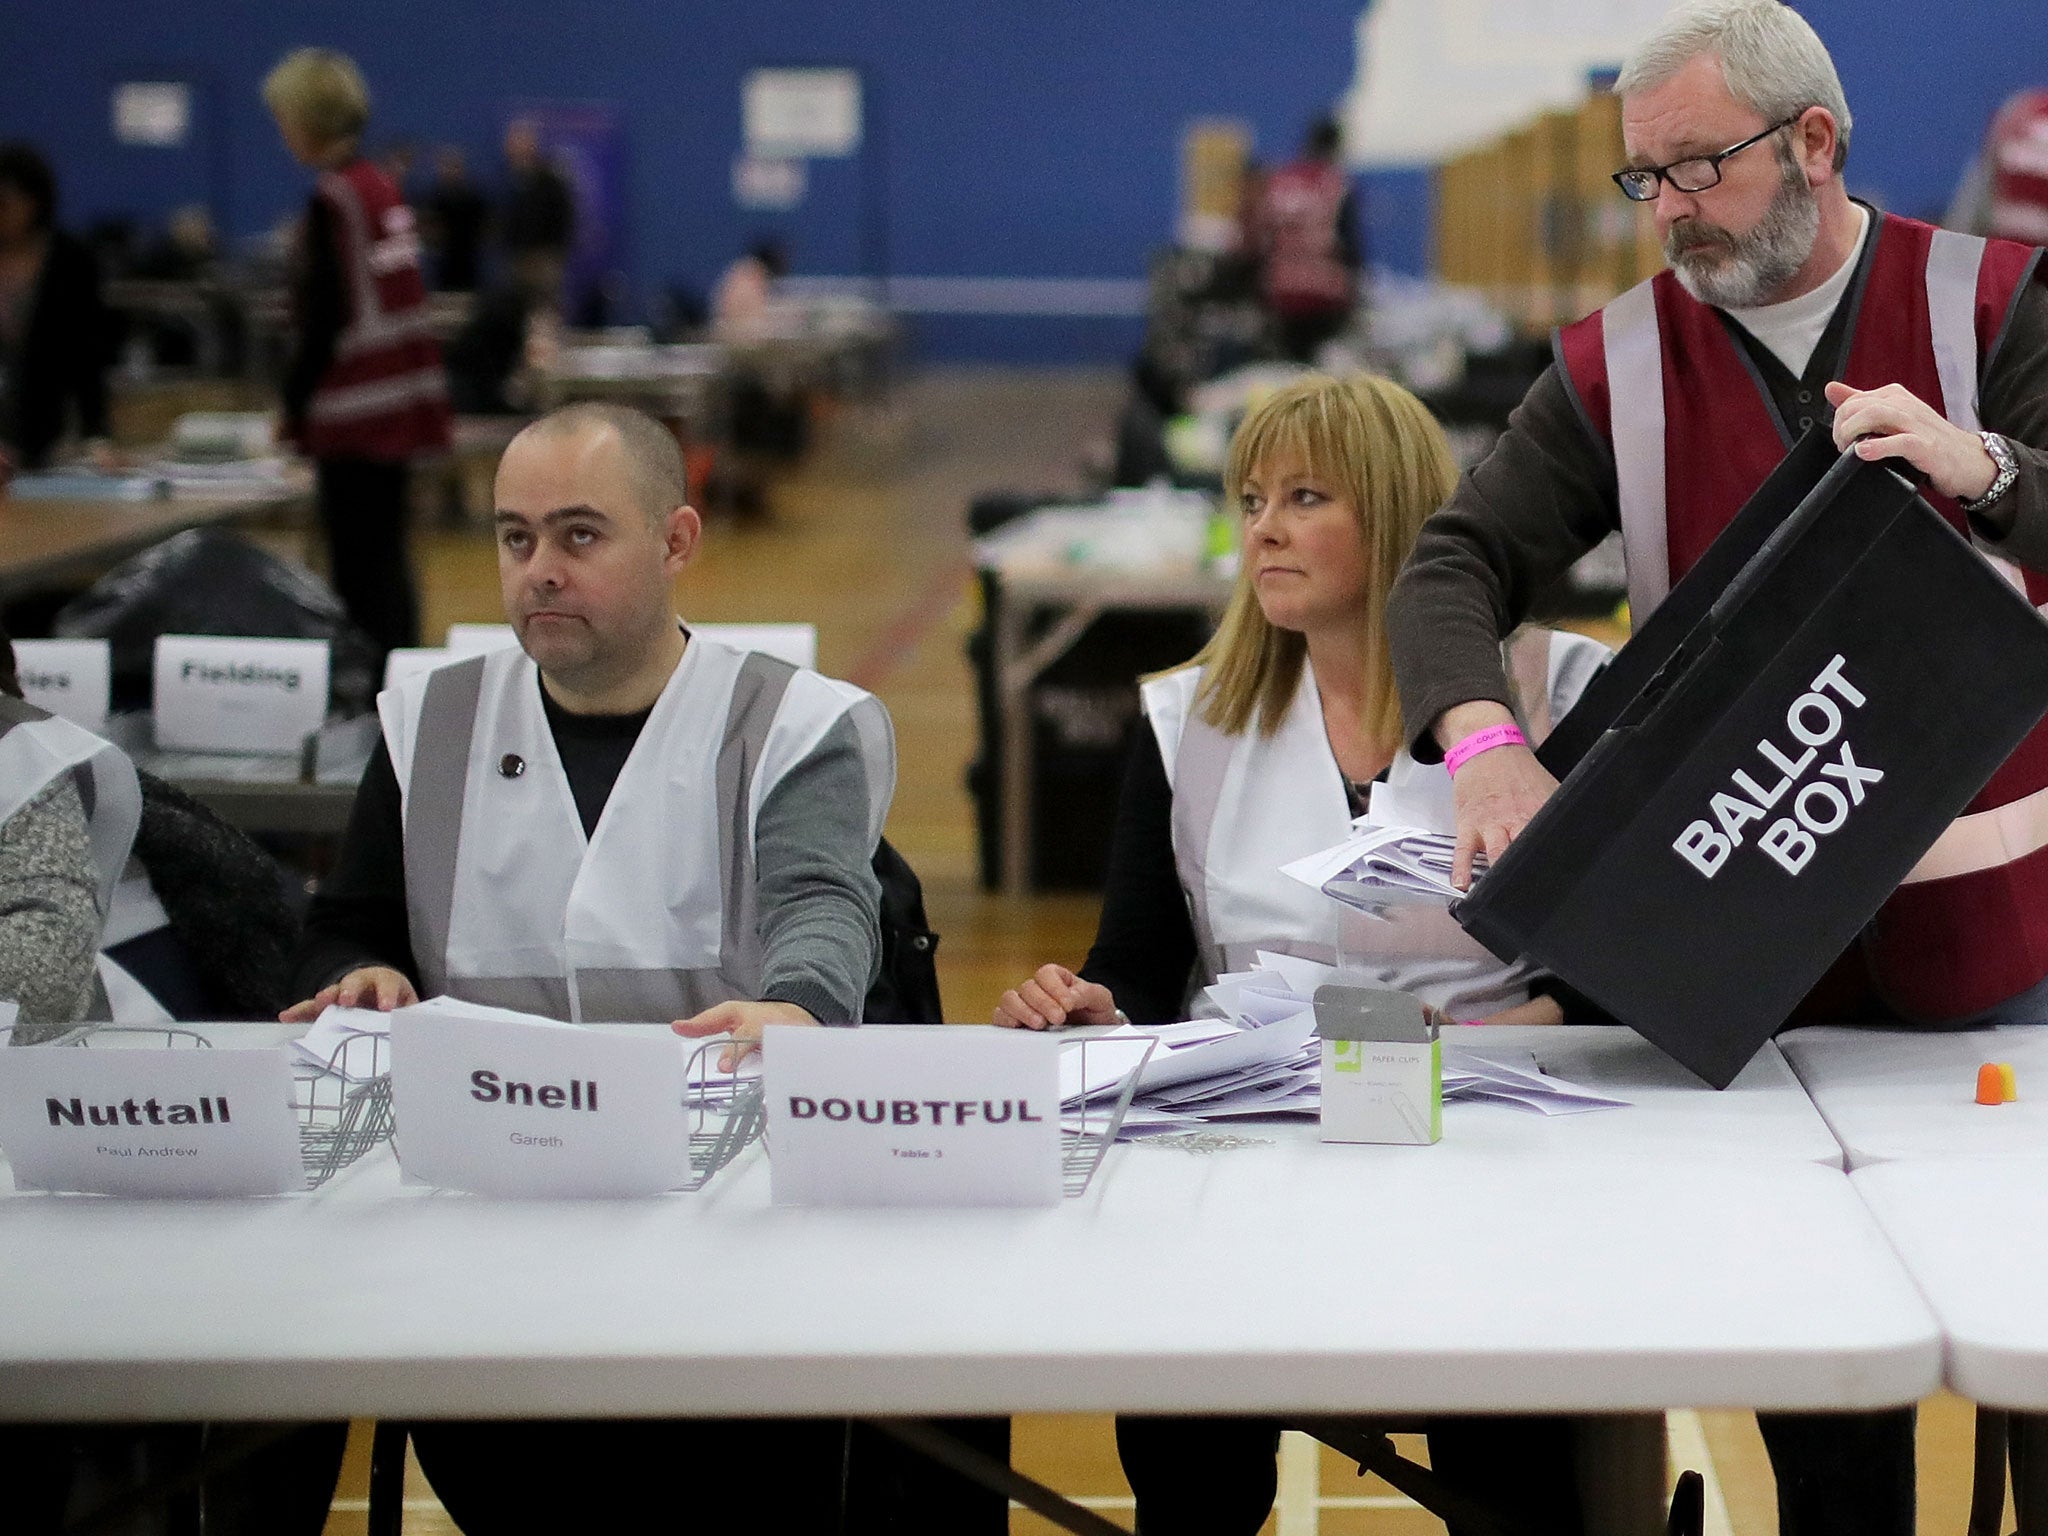 Count on it: in Stoke, the Monster Raving Loonies beat a truly monstrous party